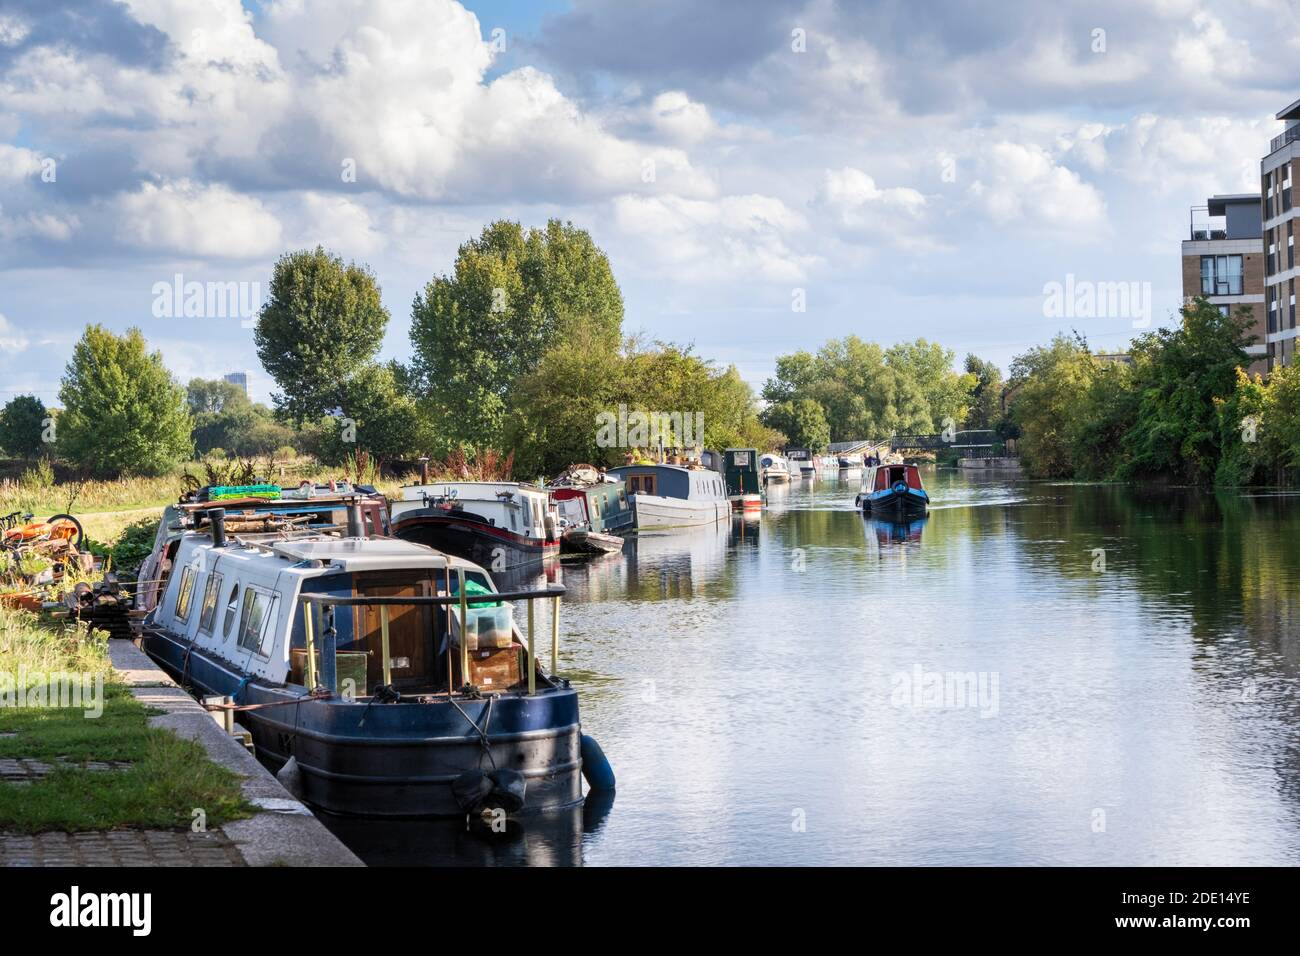 Summer shot of canal boats moored on the River Lea, East London, London, England, United Kingdom, Europe Stock Photo